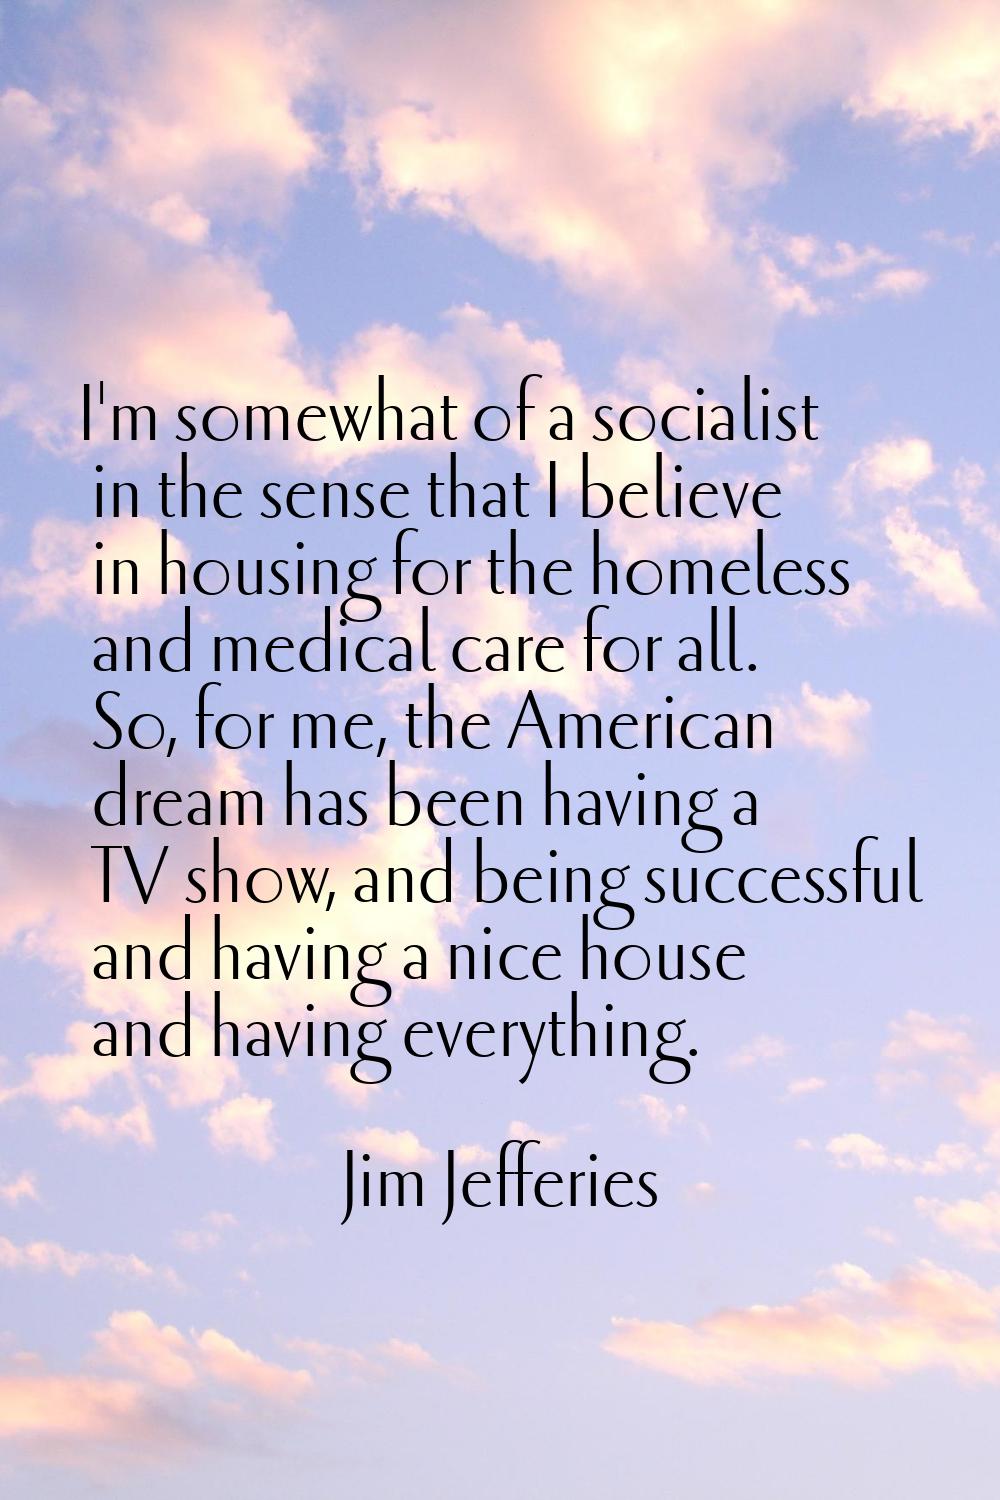 I'm somewhat of a socialist in the sense that I believe in housing for the homeless and medical car